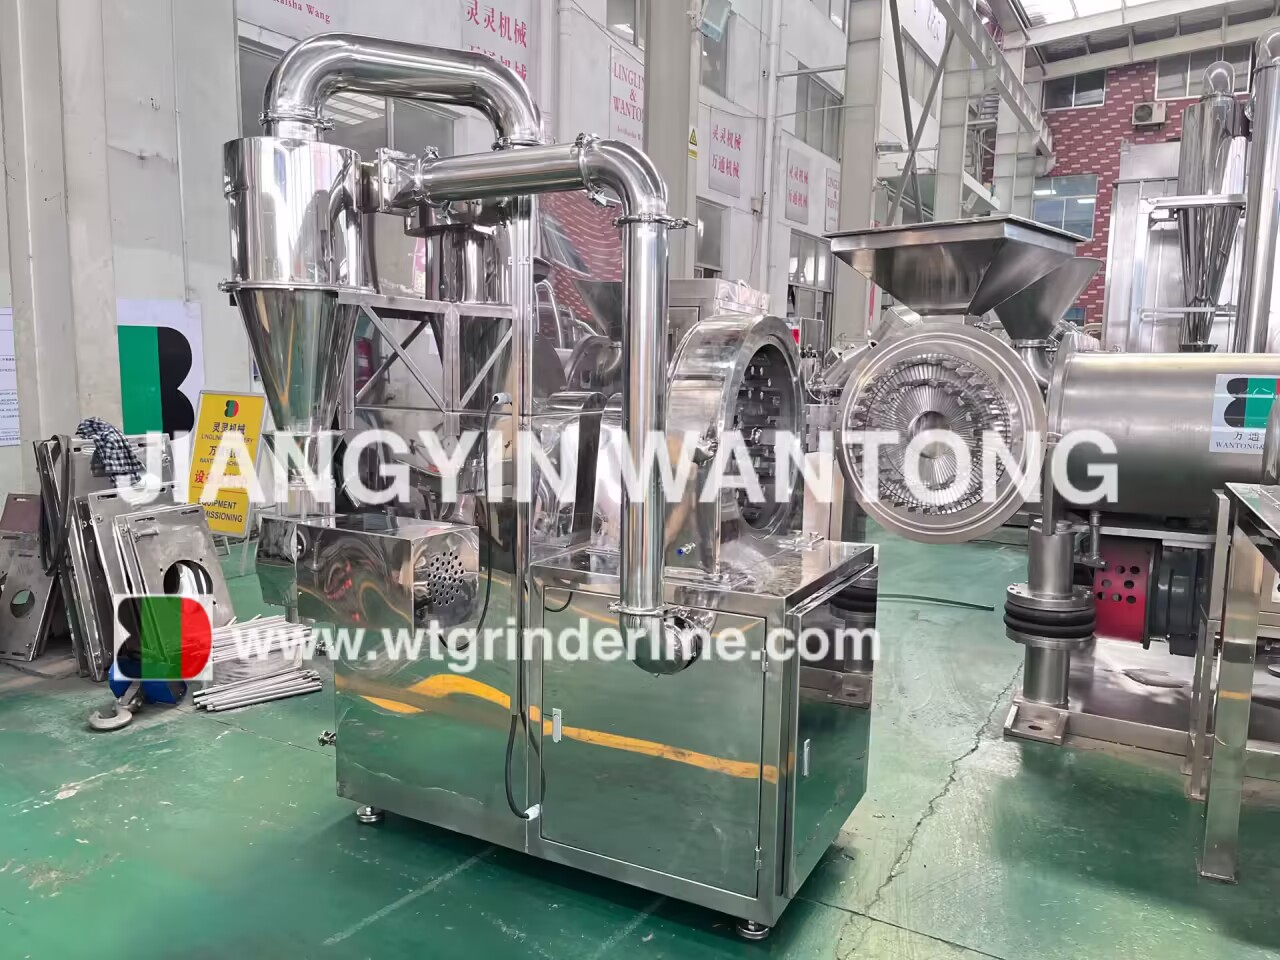 WLF Industrial Chili Cumin Pepper Ginger Onion Curry Powder Grinding Machine Making Grinder